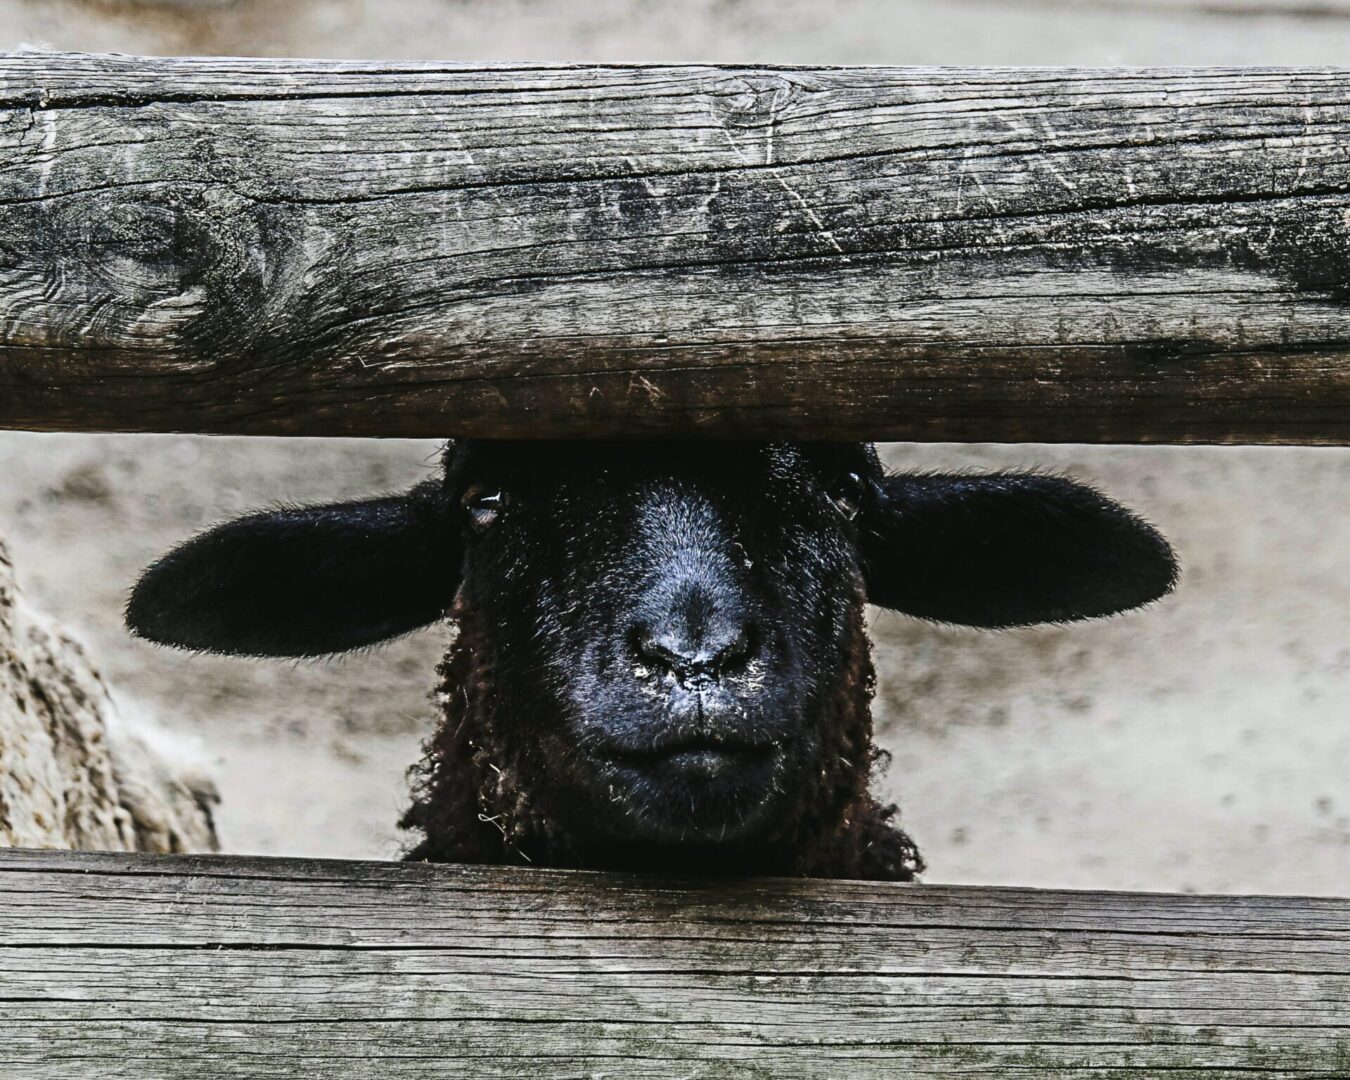 A black sheep peeking over the top of a wooden fence.